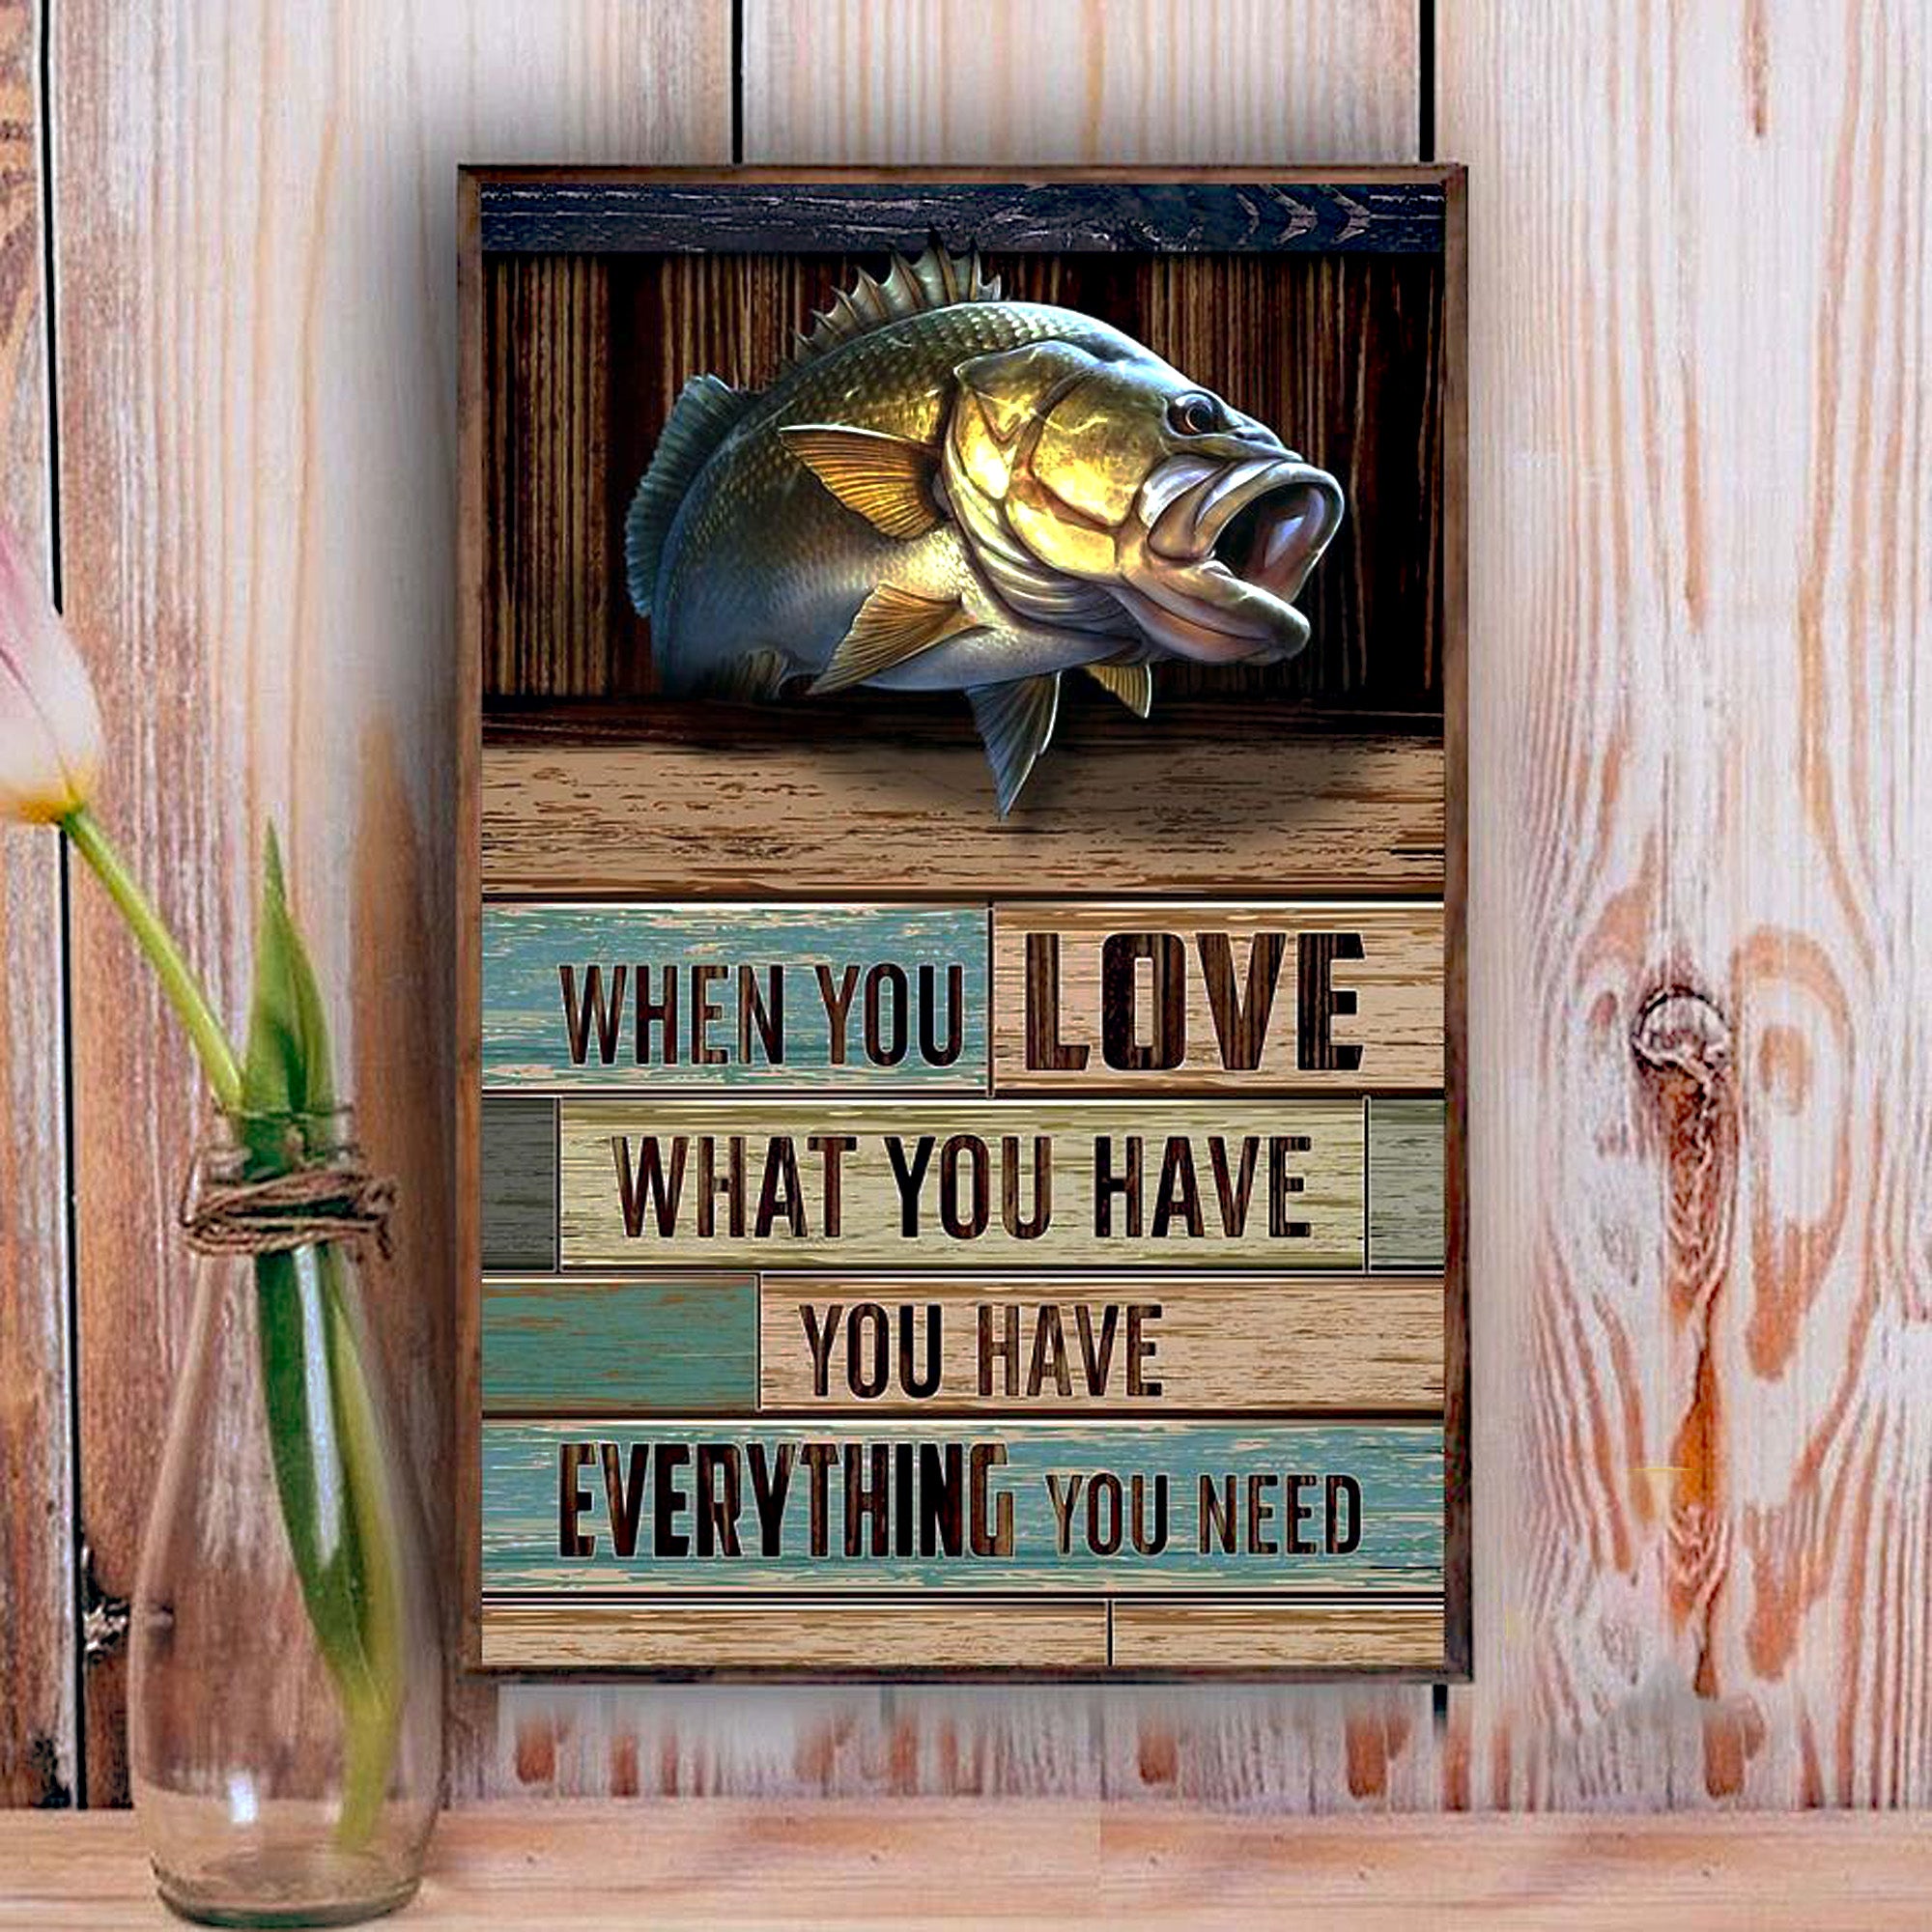 Fishing Poster - You Have Everything You Need - Poster Art Design